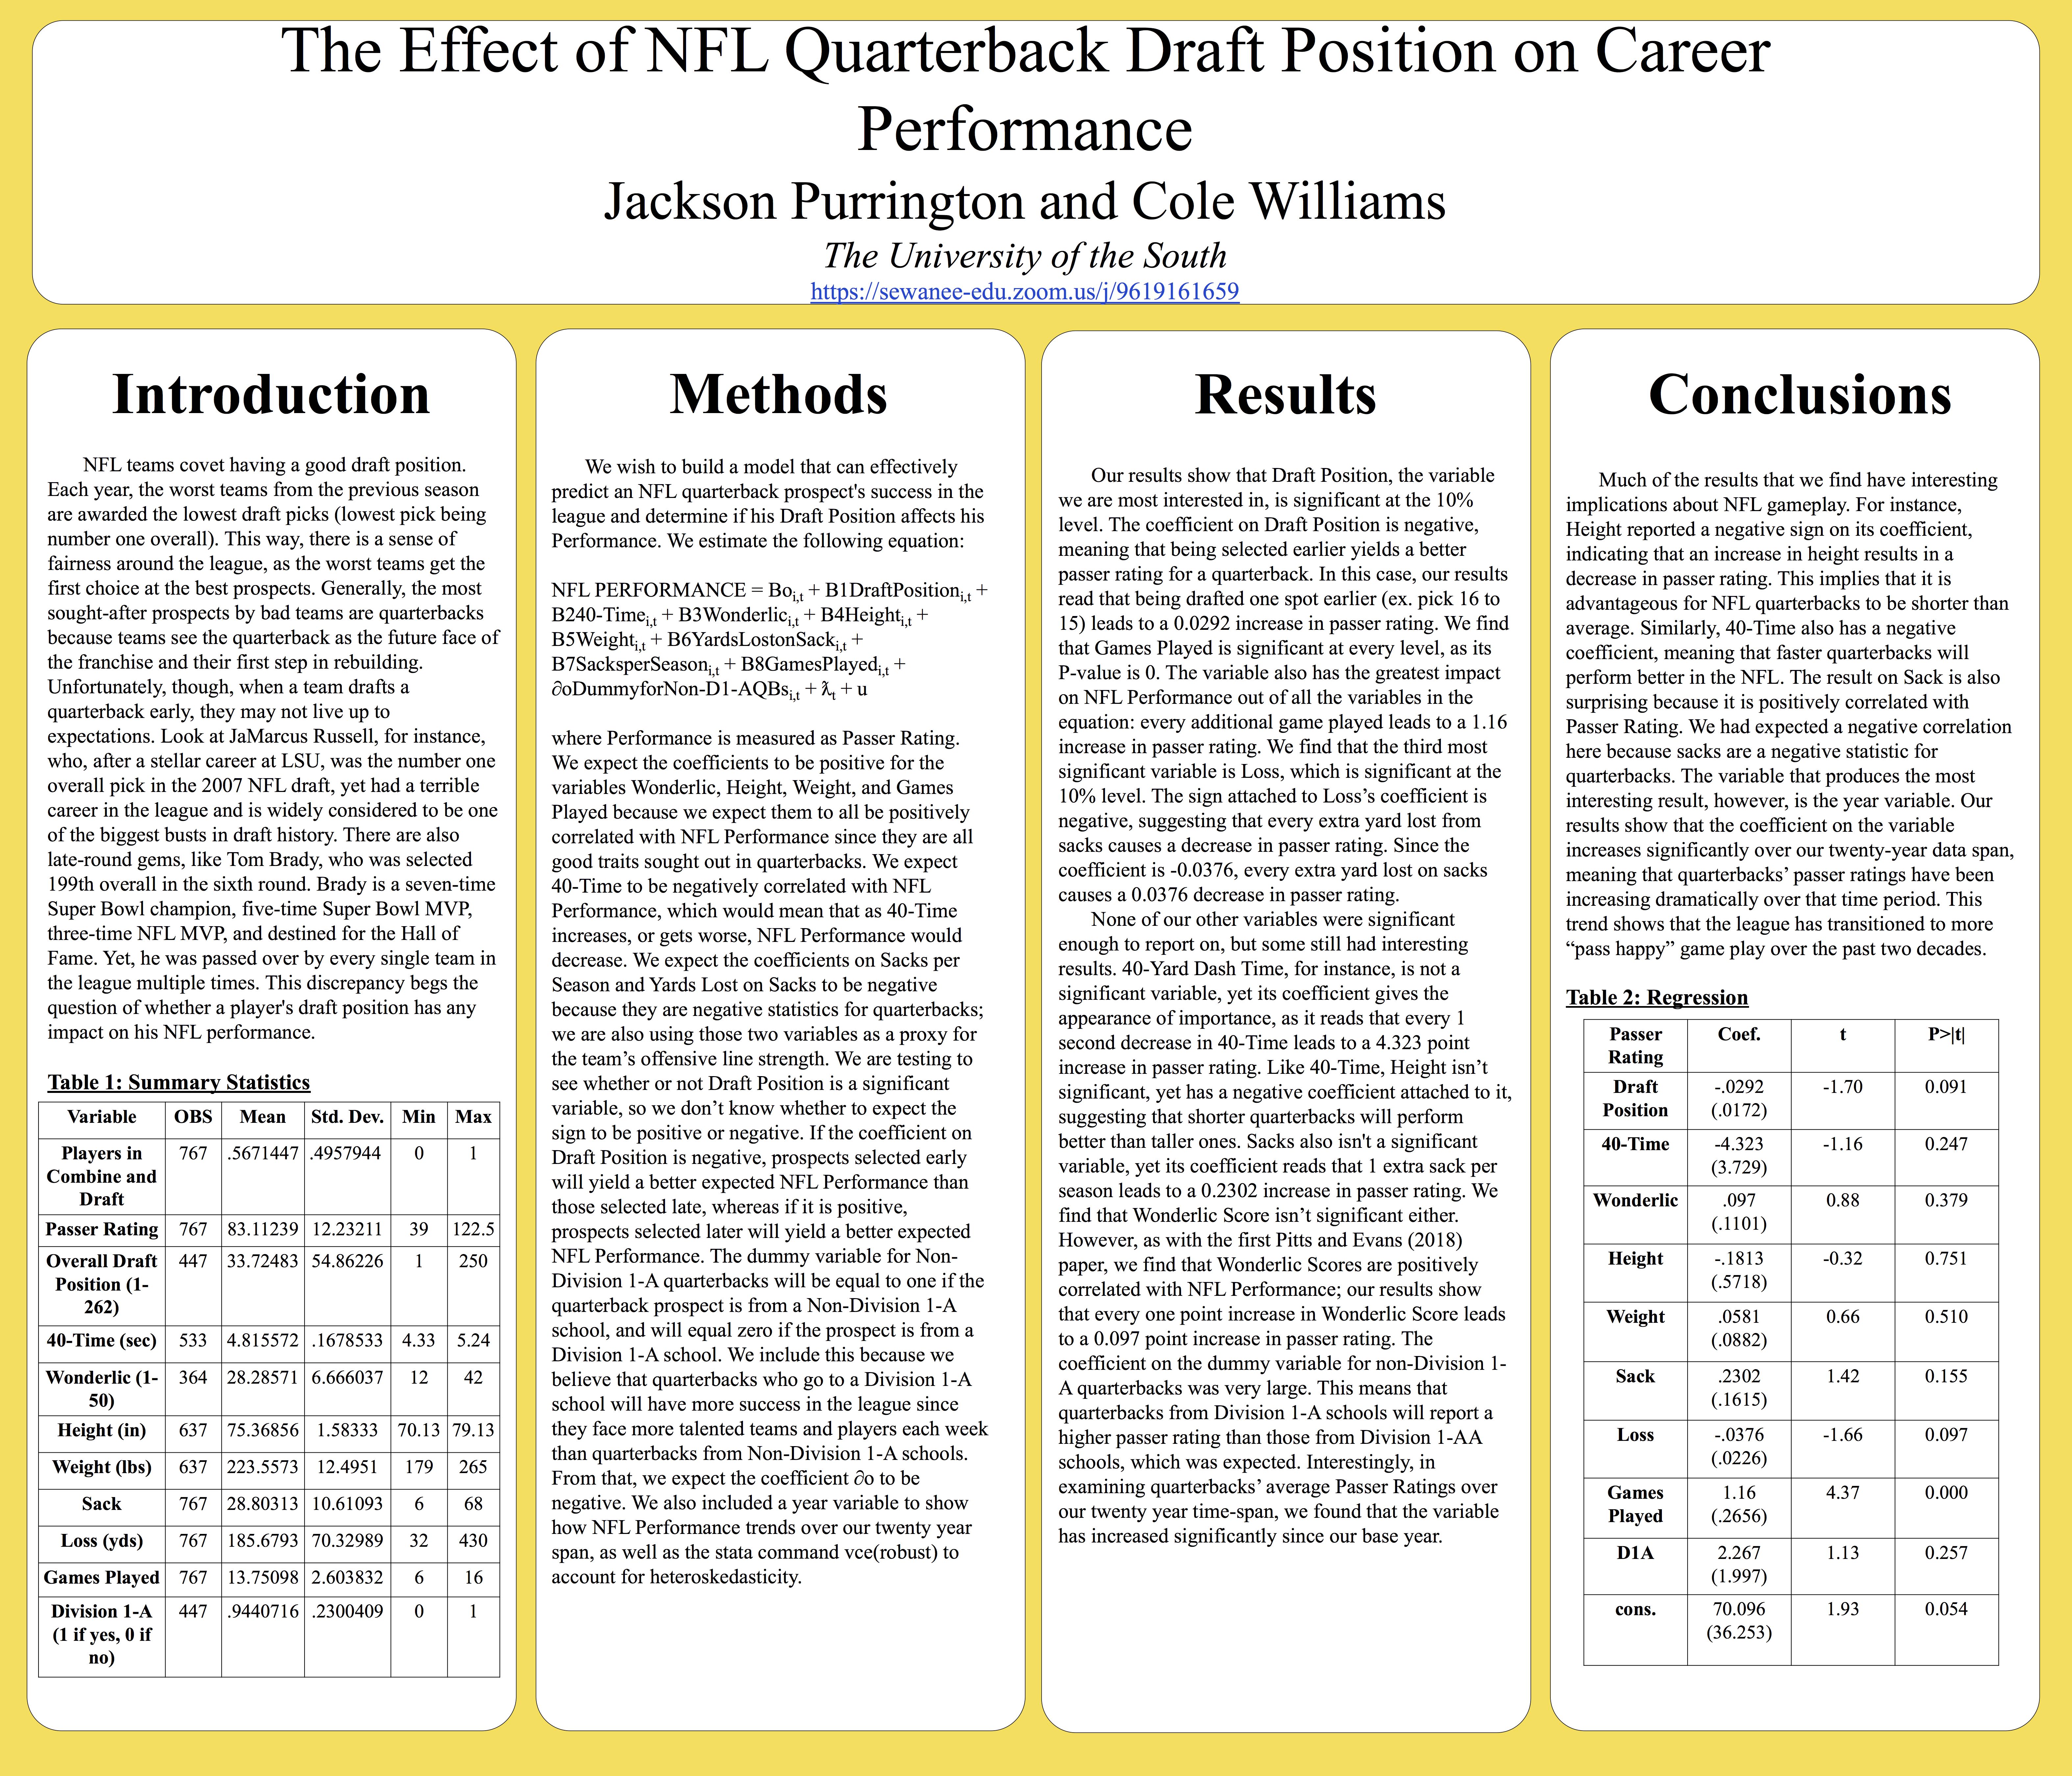 Showcase Image for The Effect of NFL Quarterback Draft Position on Career Performance